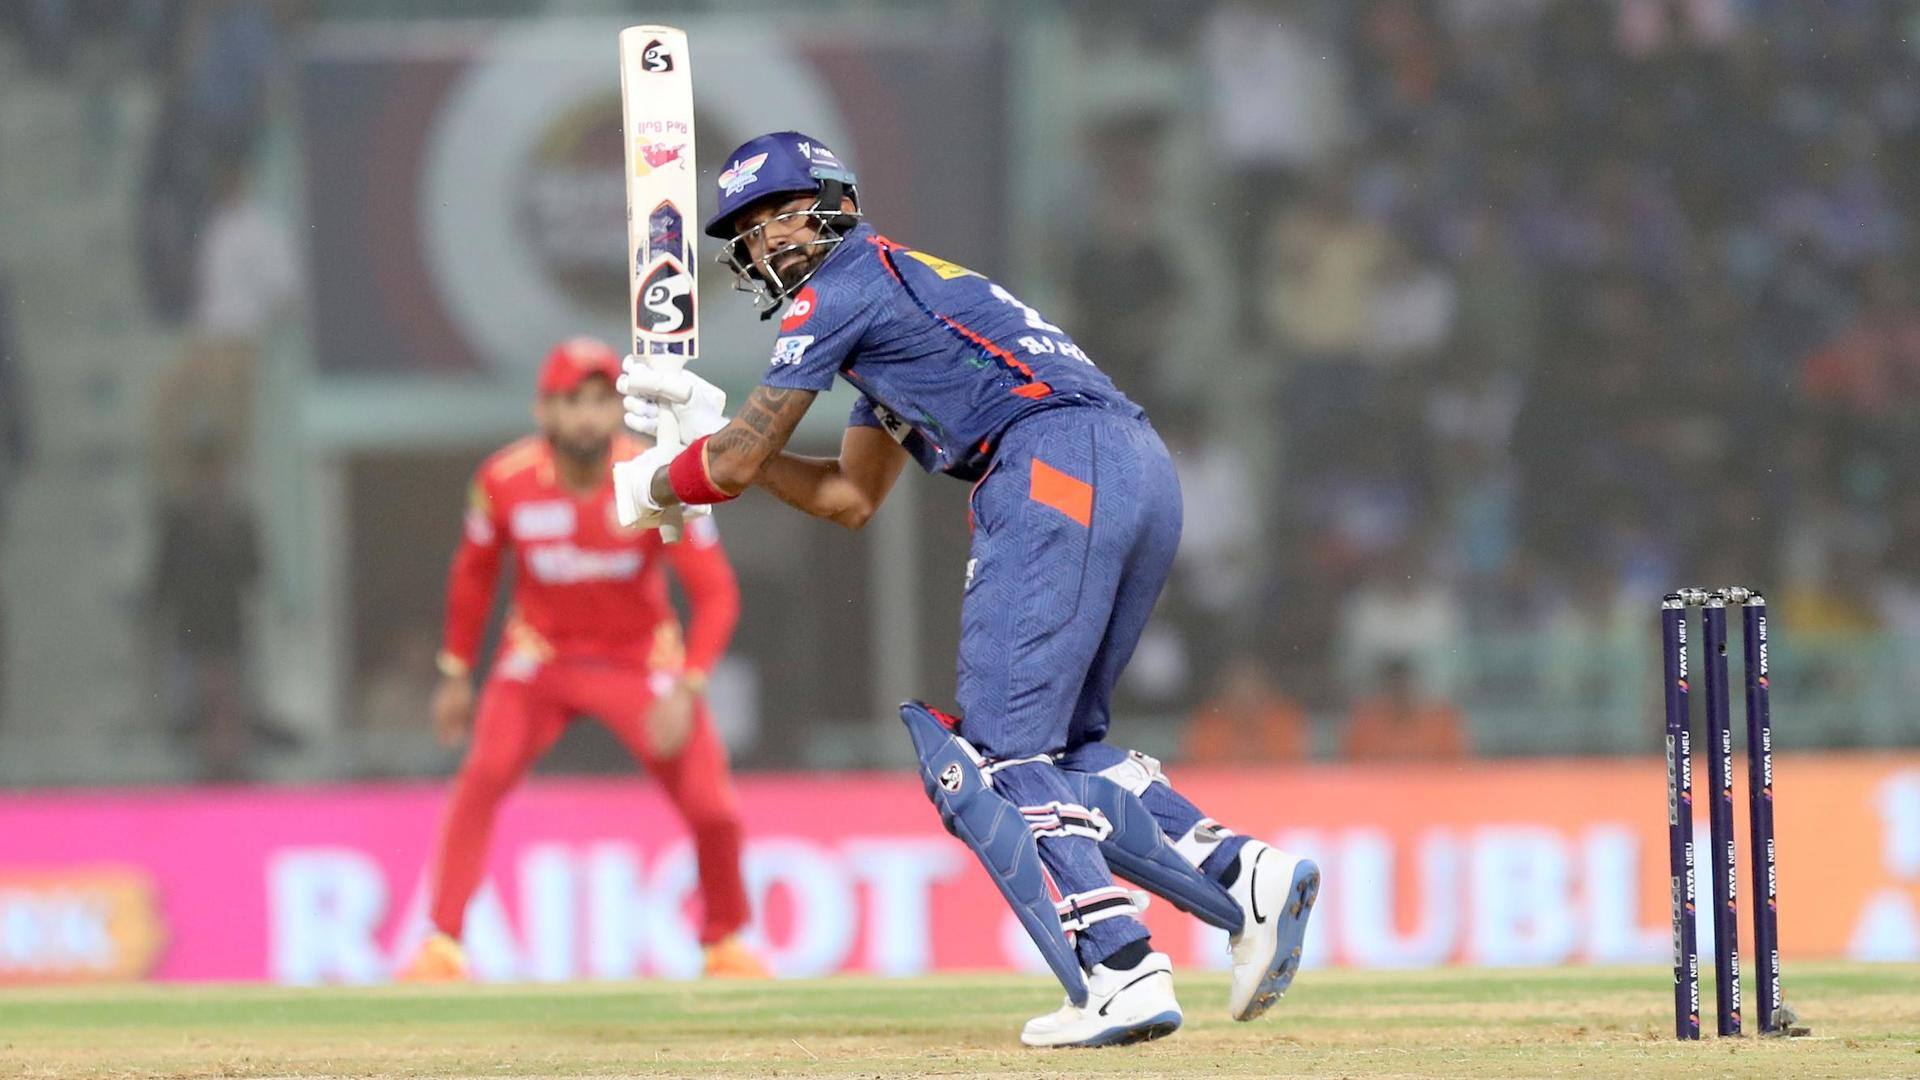 KL Rahul becomes the fastest to 4,000 IPL runs: Stats